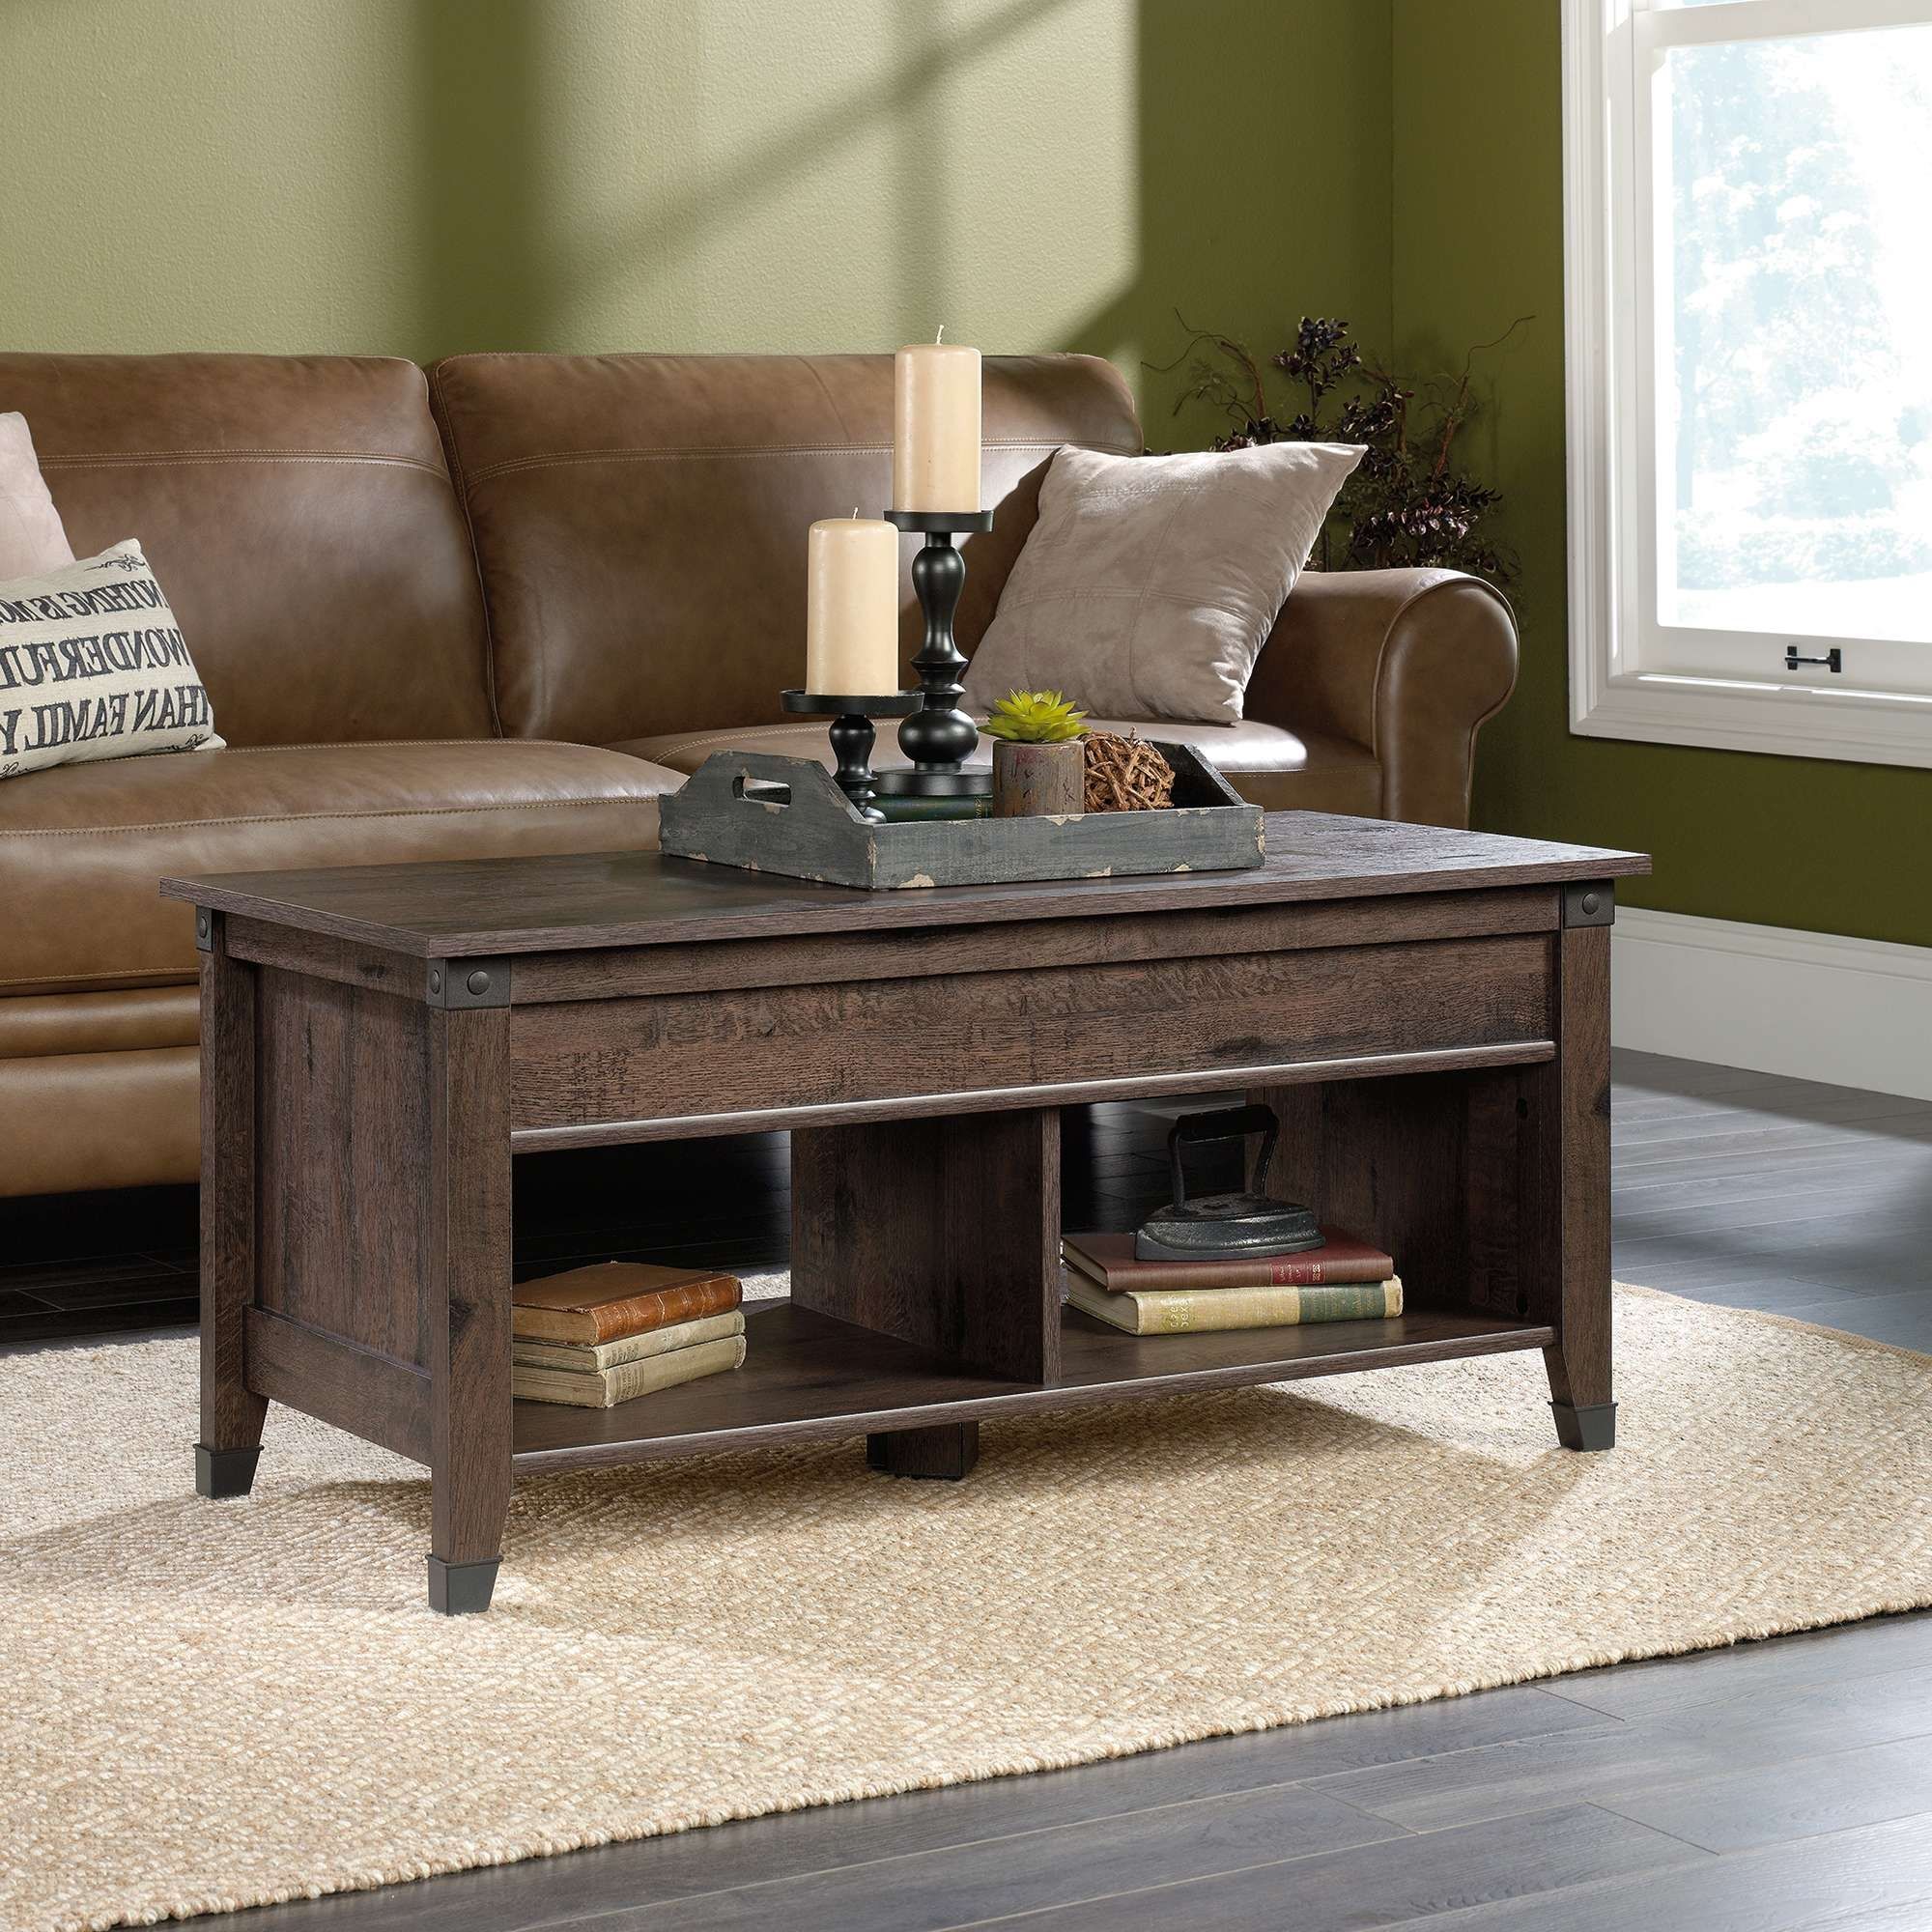 Sauder Regarding Well Liked Lift Top Oak Coffee Tables (View 6 of 20)